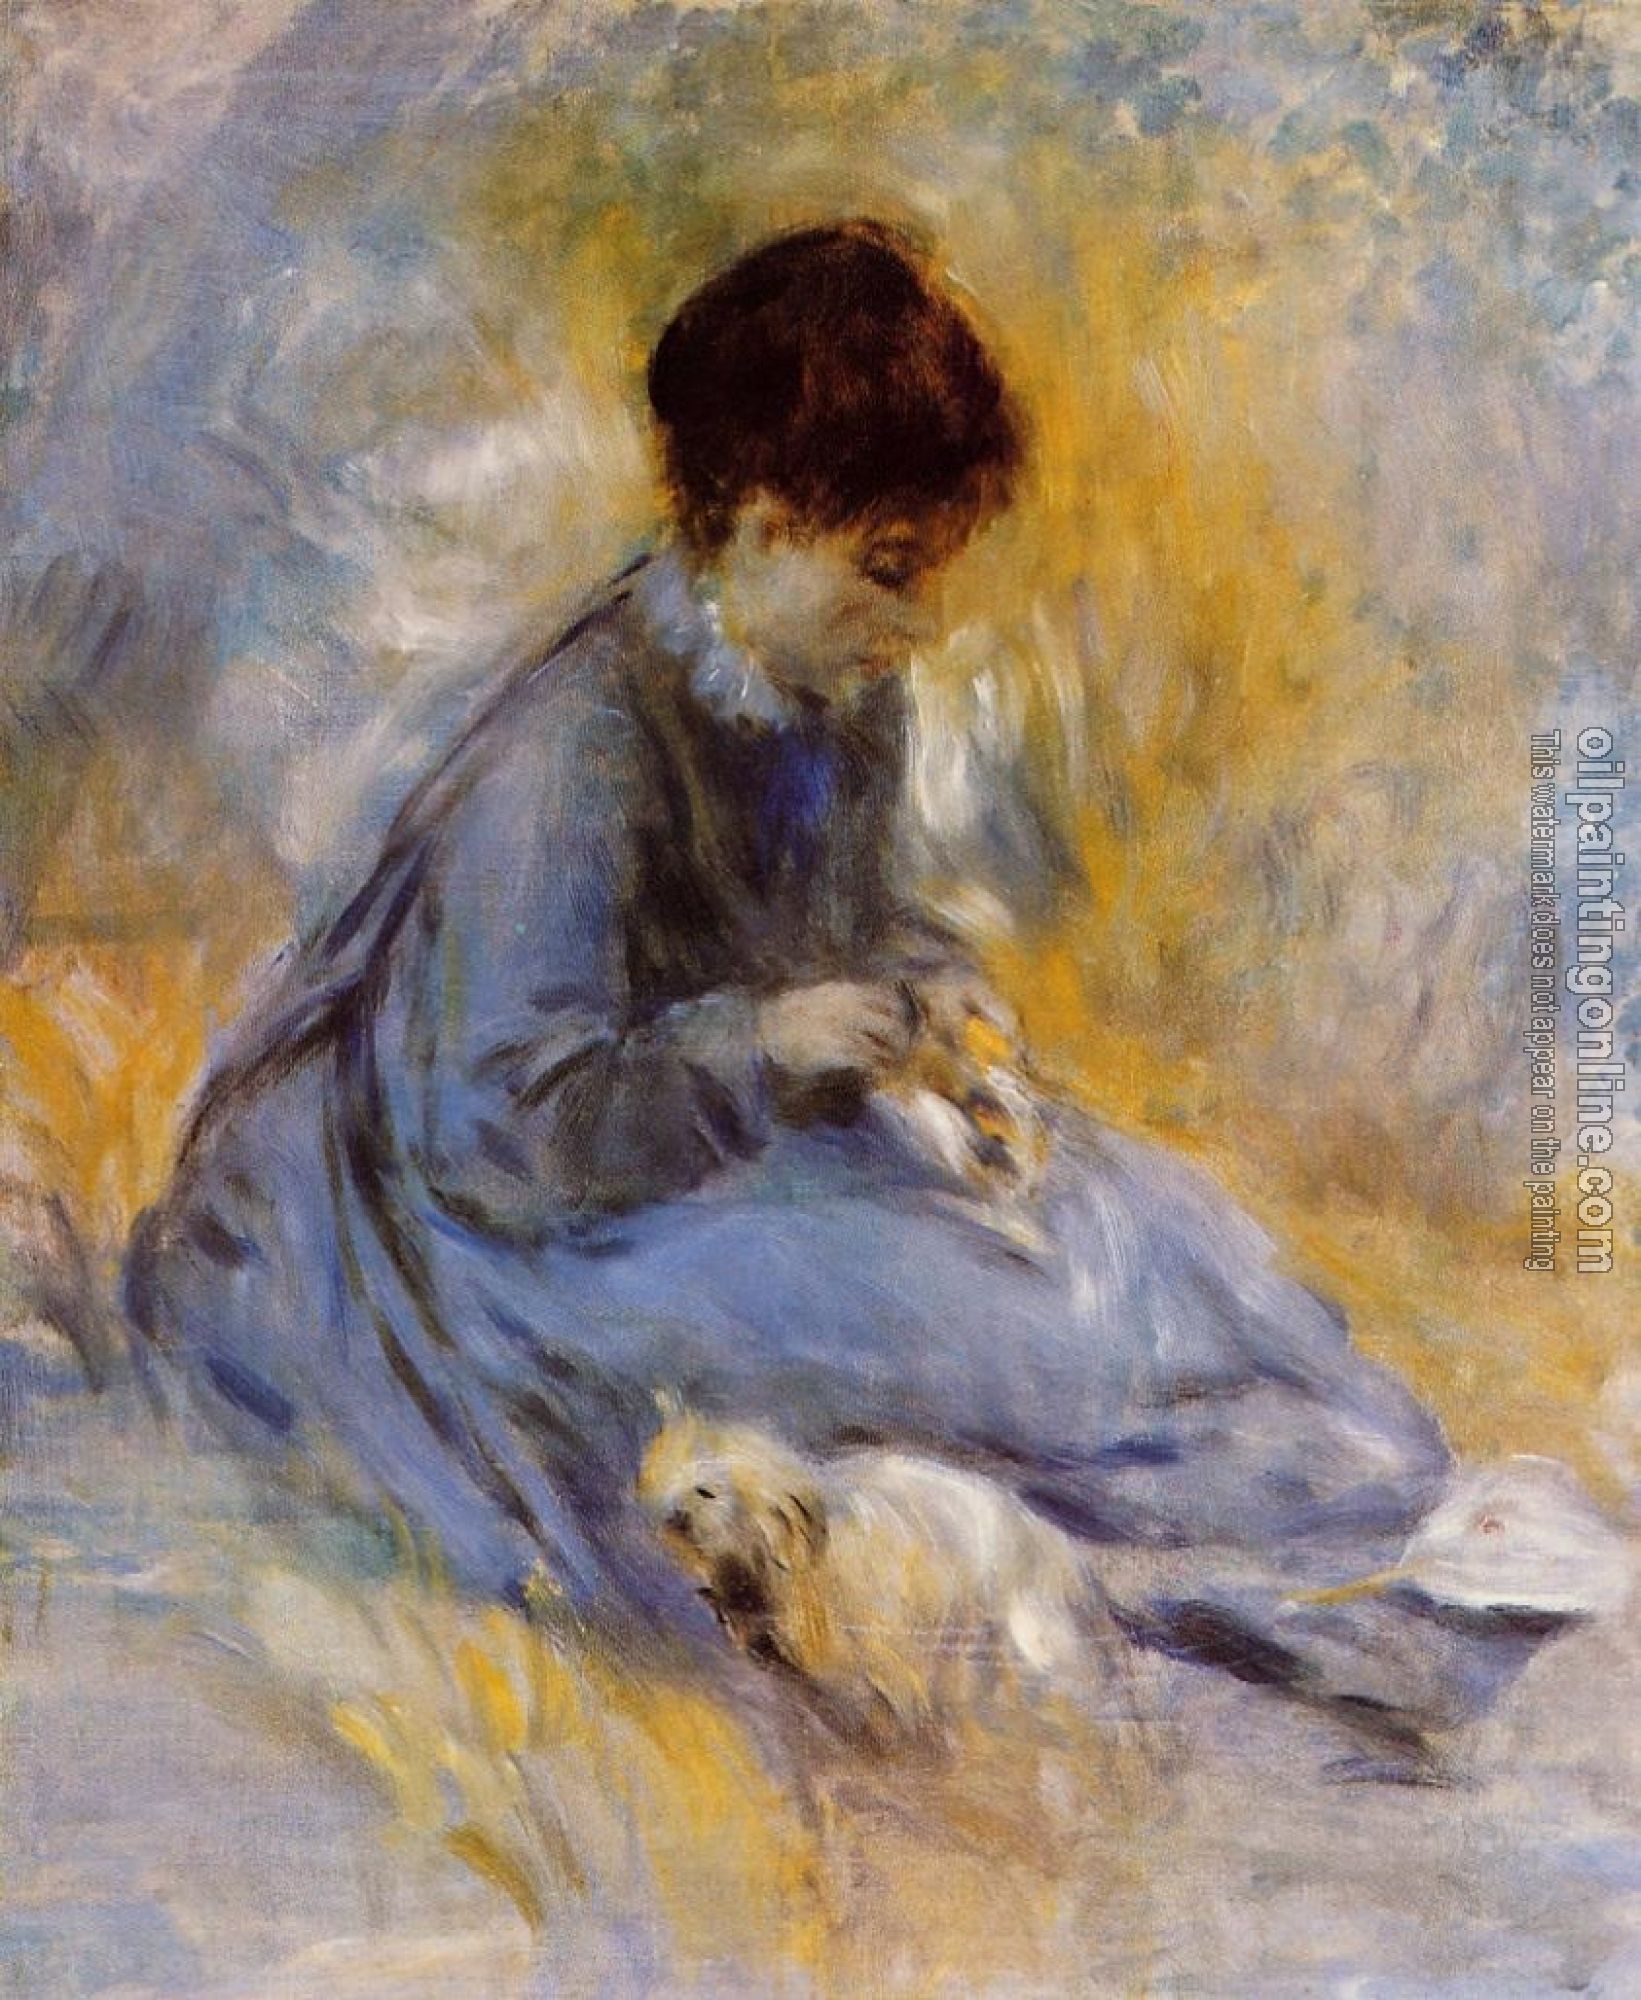 Renoir, Pierre Auguste - Young Woman with a Dog